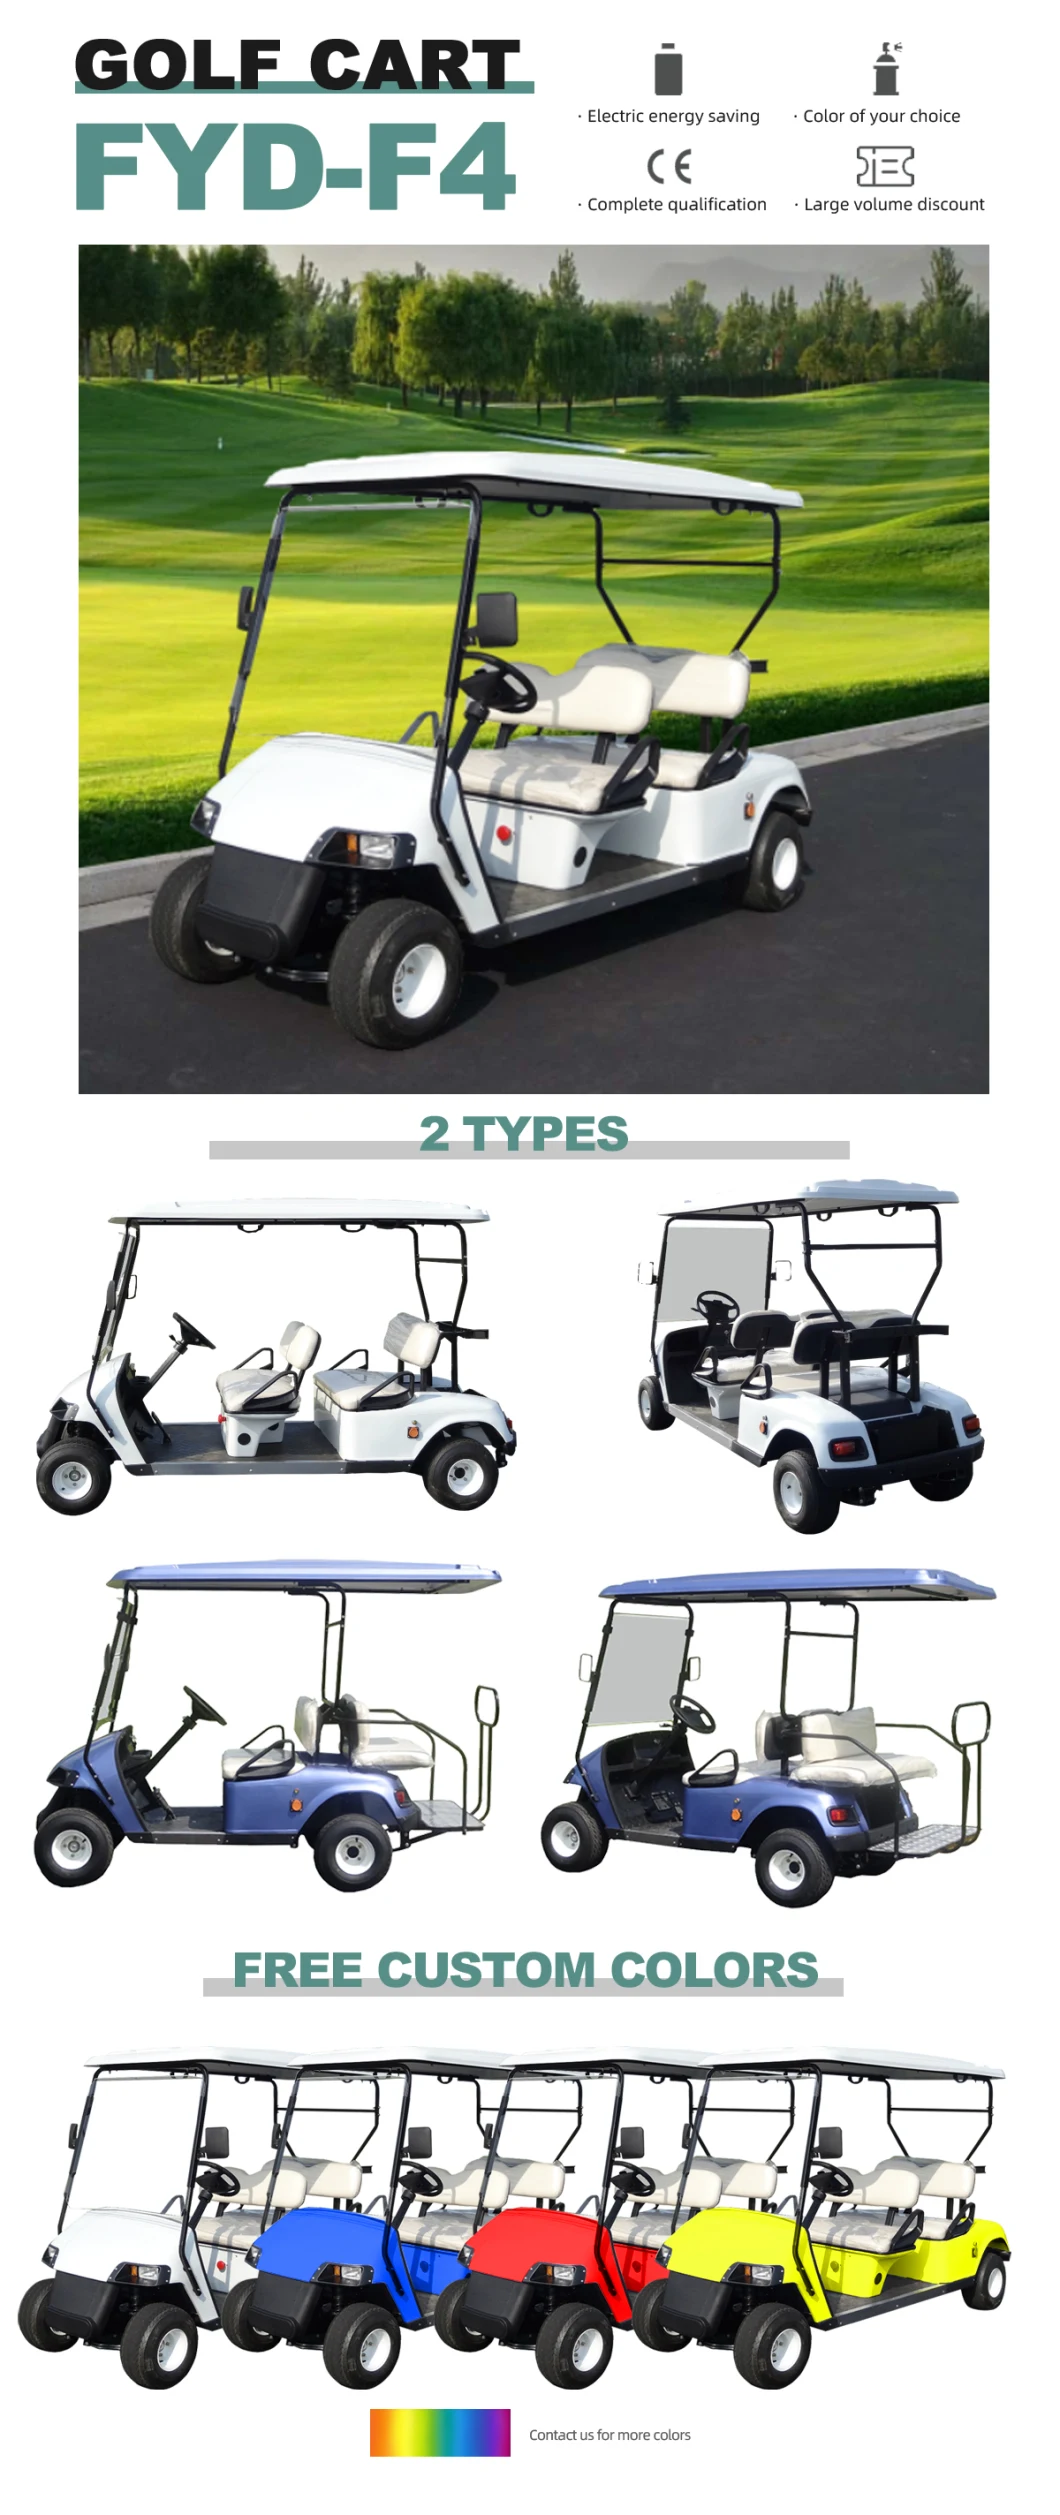 Wholesale 4 Seat 4 2 Person Seater Mini Tour Club Car Bus Sport Buggy Mobility Scooter Electric Vehicle Electric Golf Cart Price for Sale with Lithium Battery